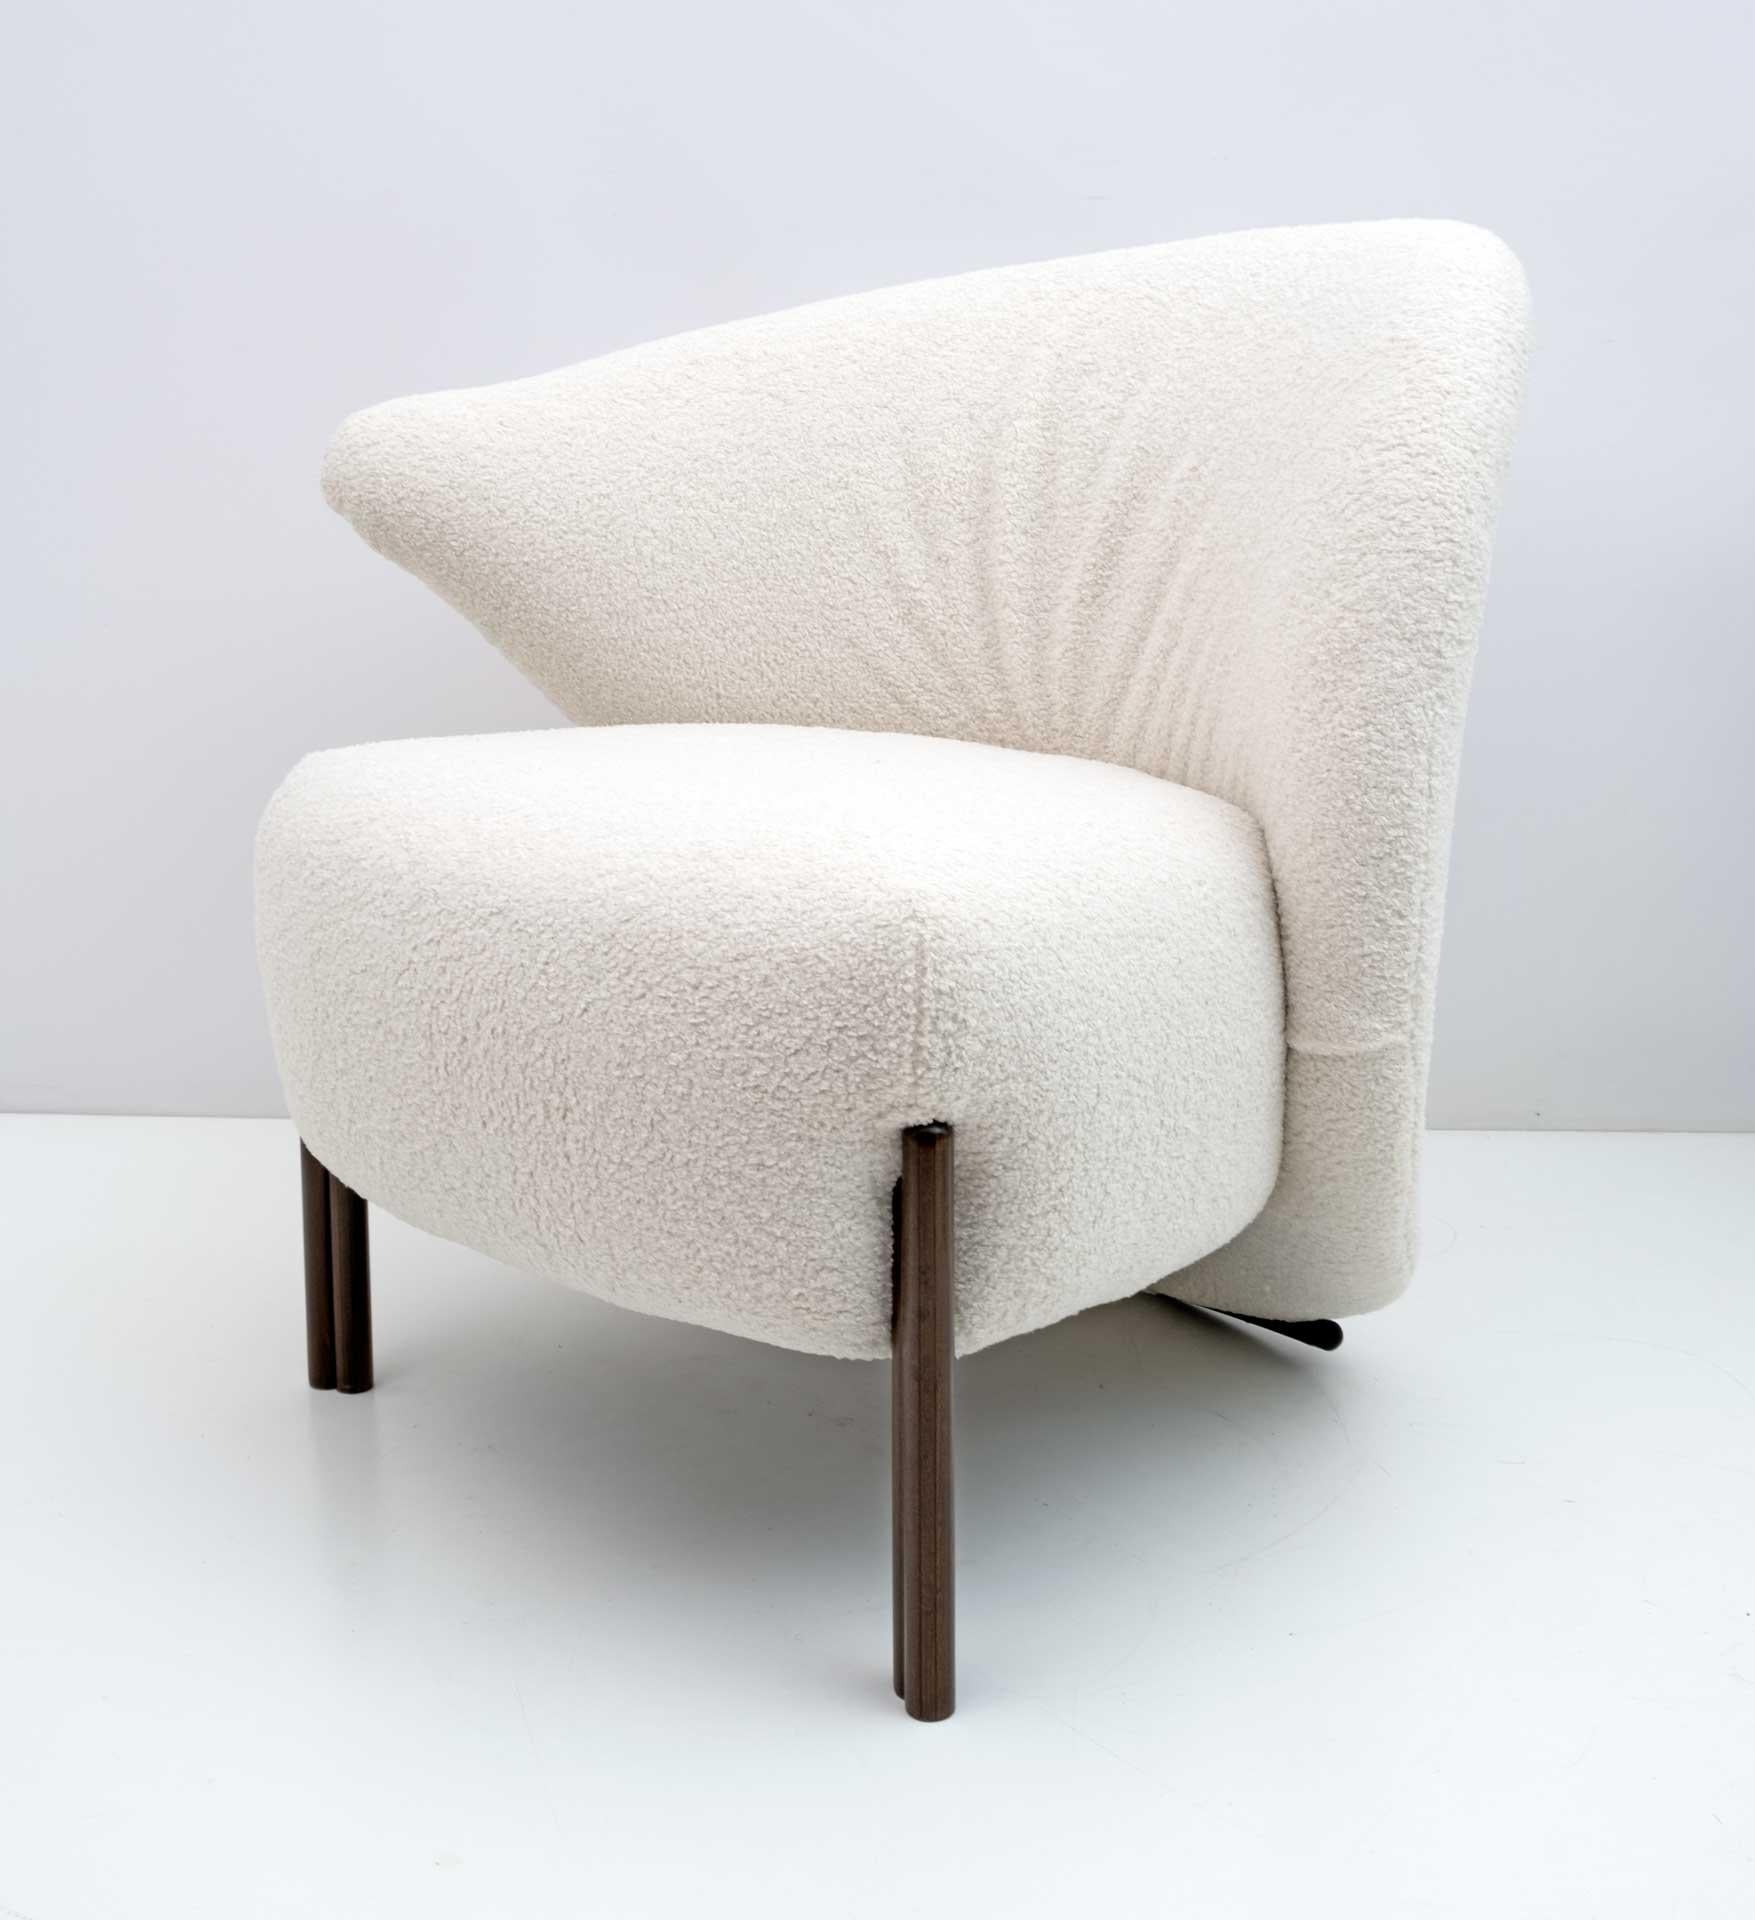 Italian armchair with a postmodern design, produced in the 80s. Completely restored and with new upholstery in fine Bouclè.